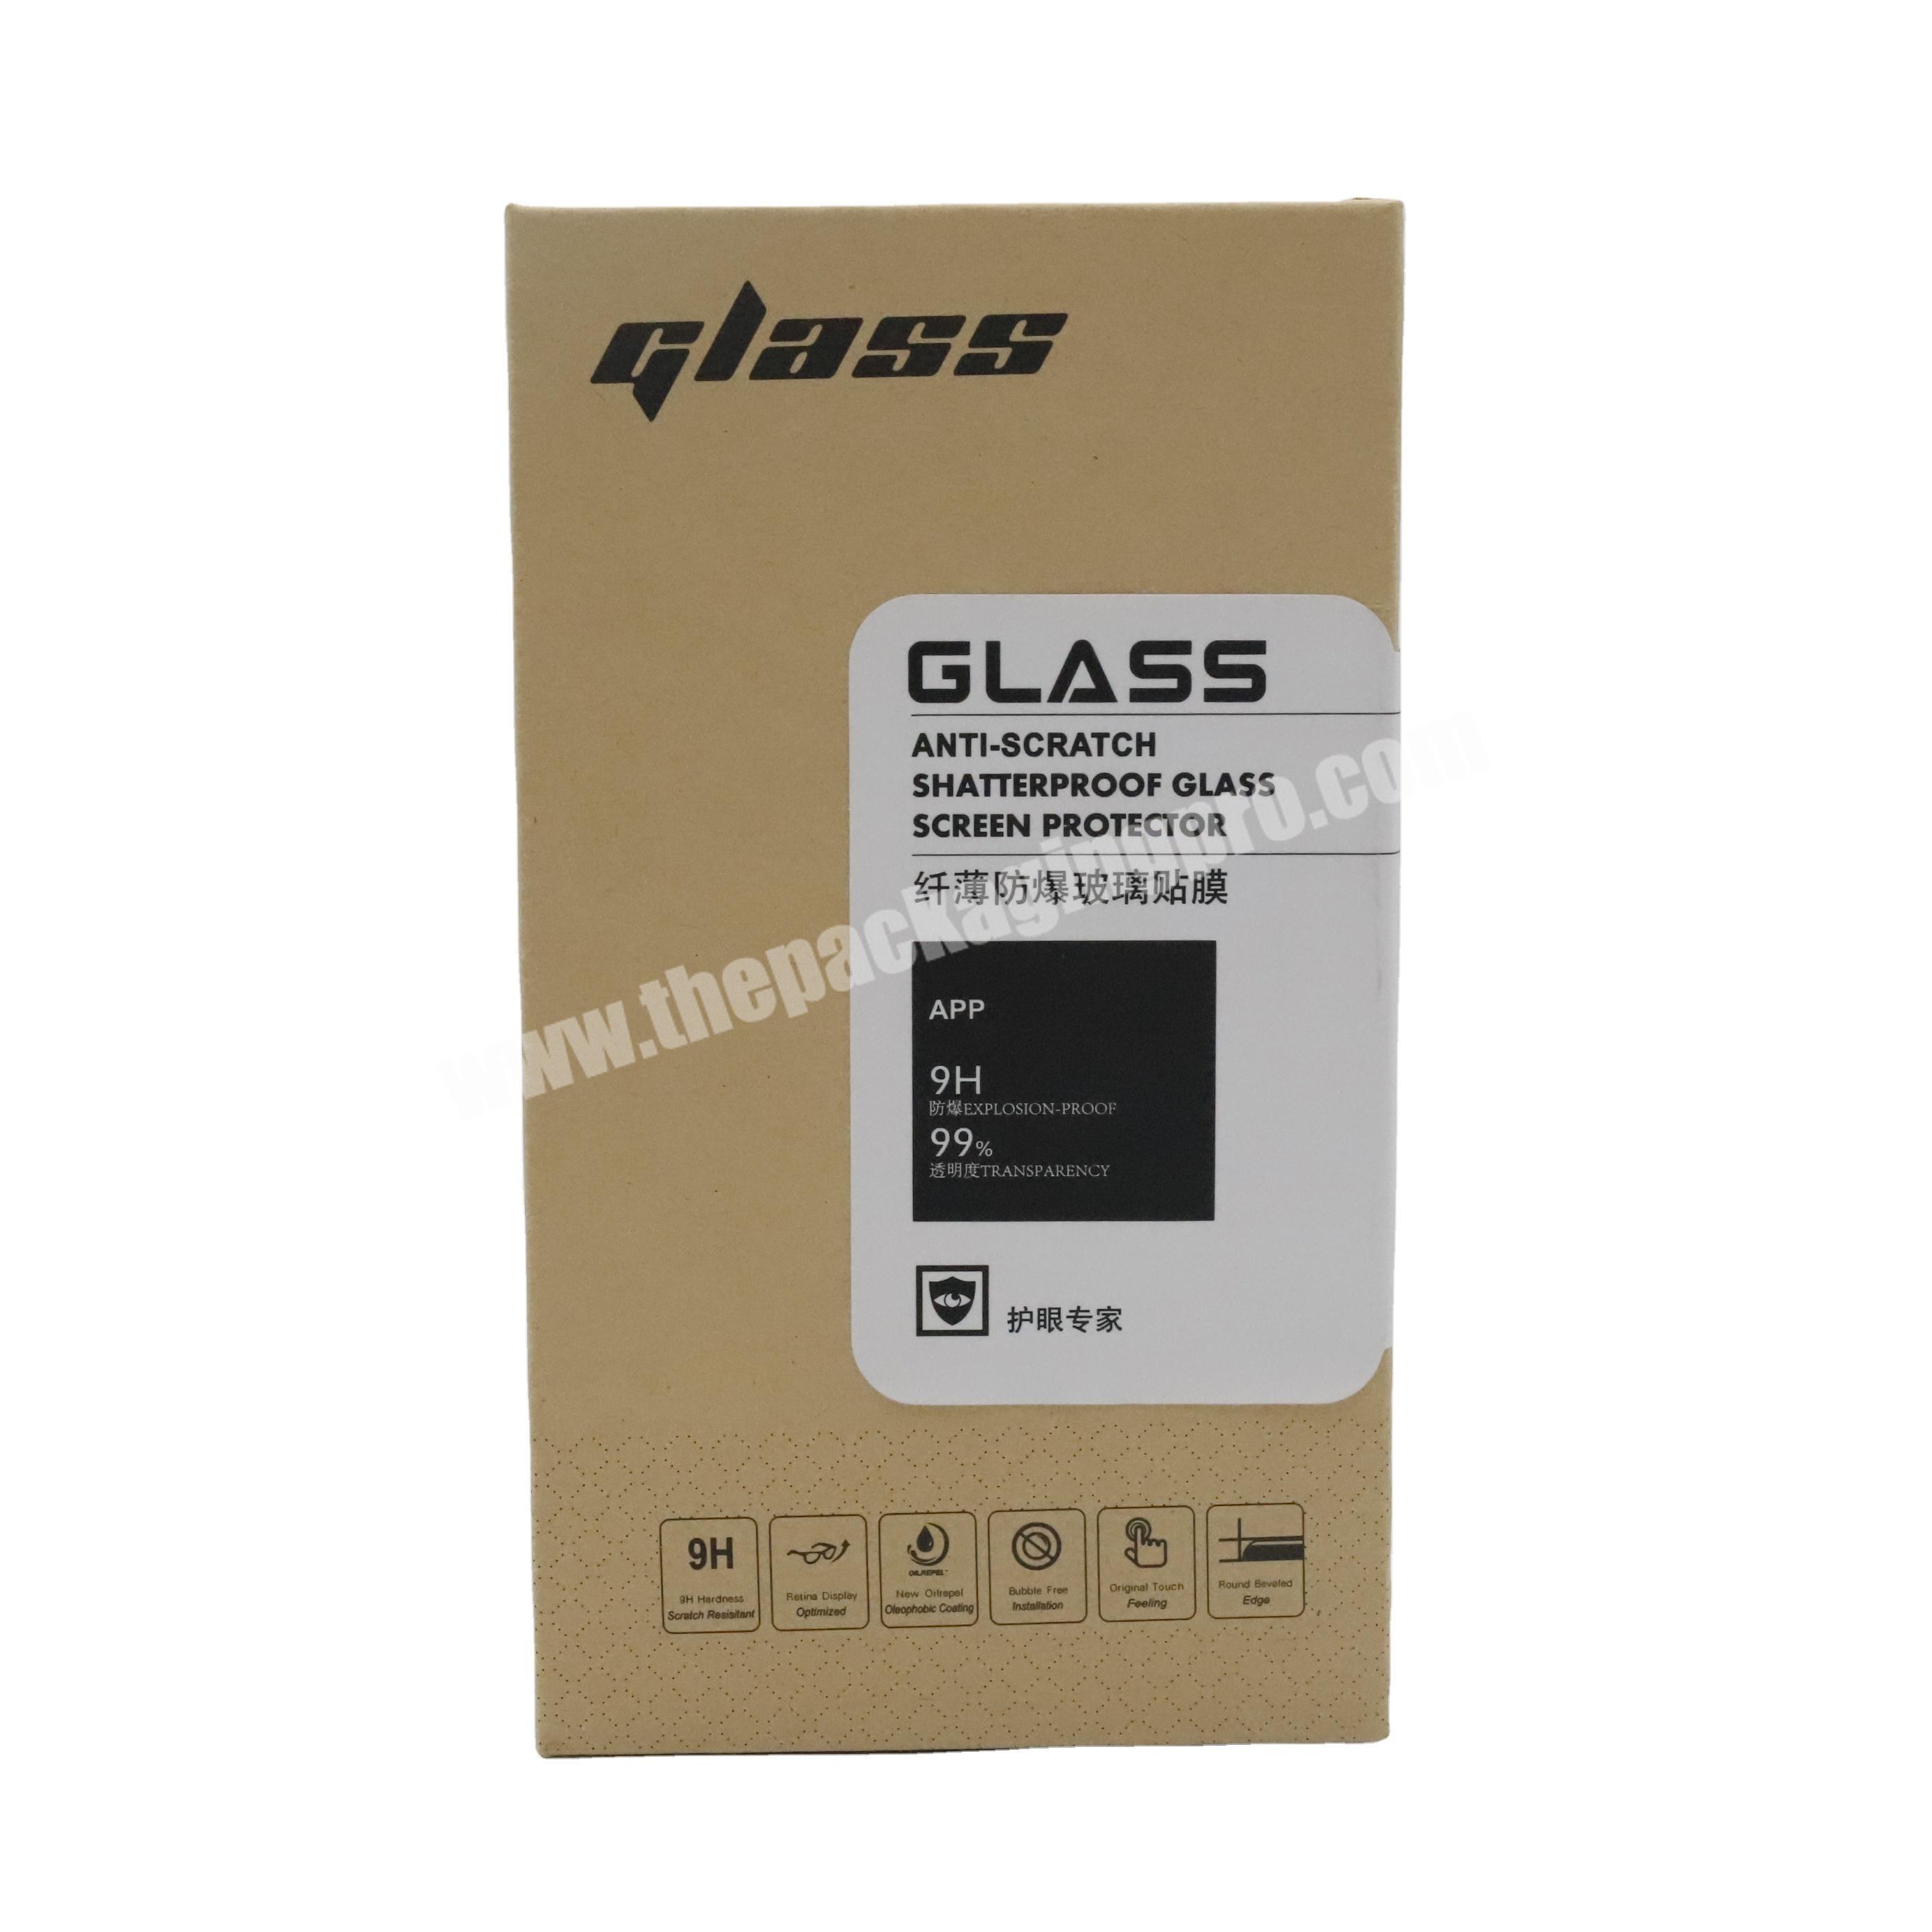 Customize Phone Case Paper Box Packing Tempered Glass Screen Protector Packaging For phone